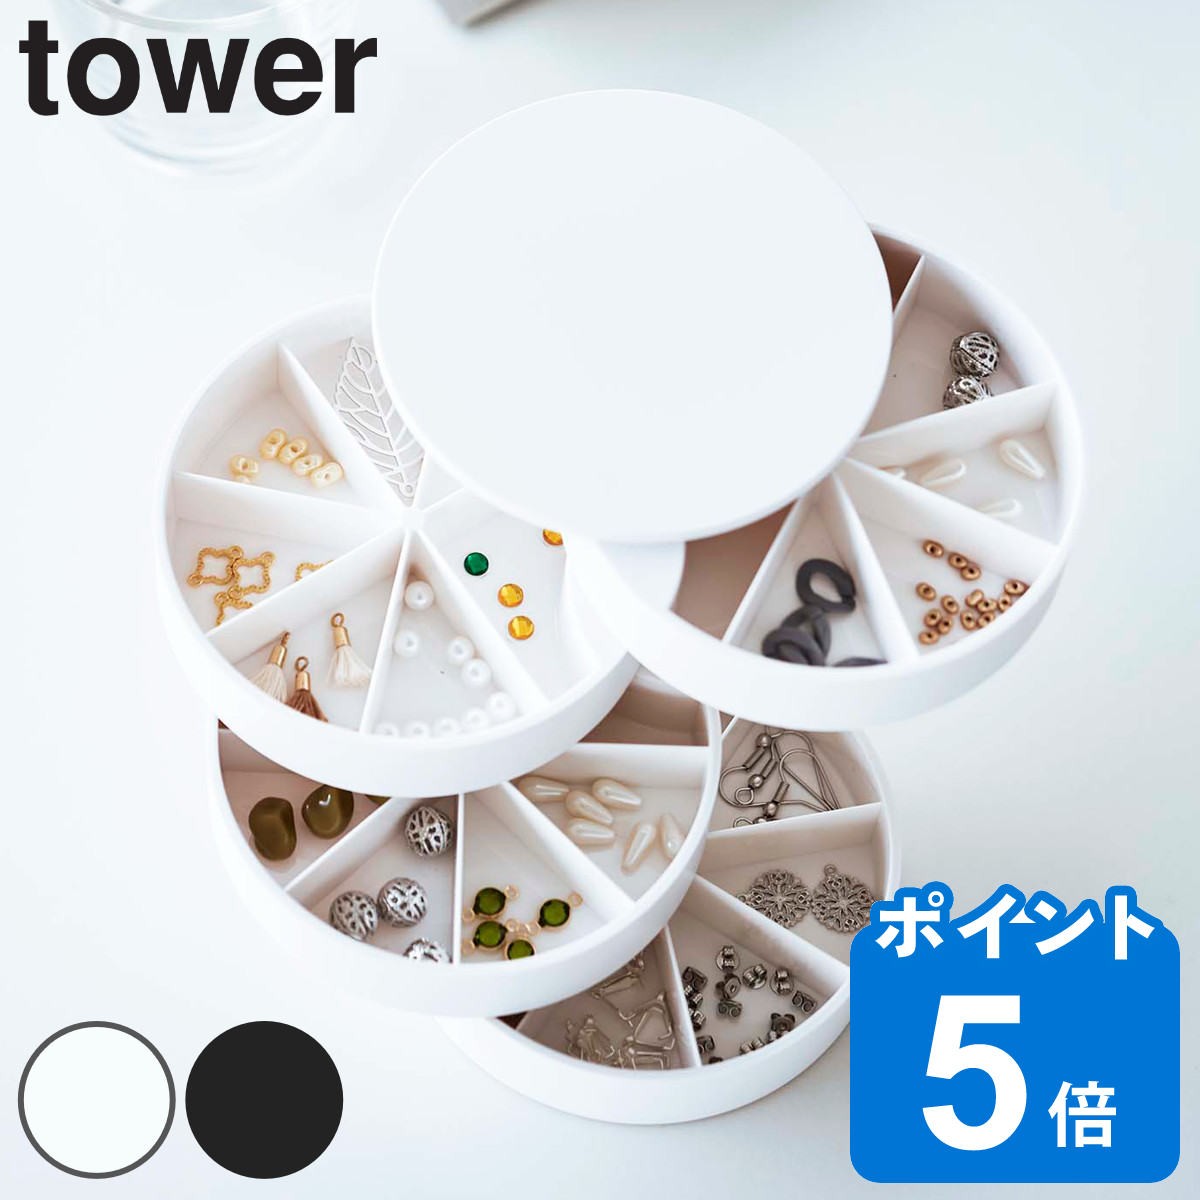 R tower lCp[cANZT[[P[X ^[